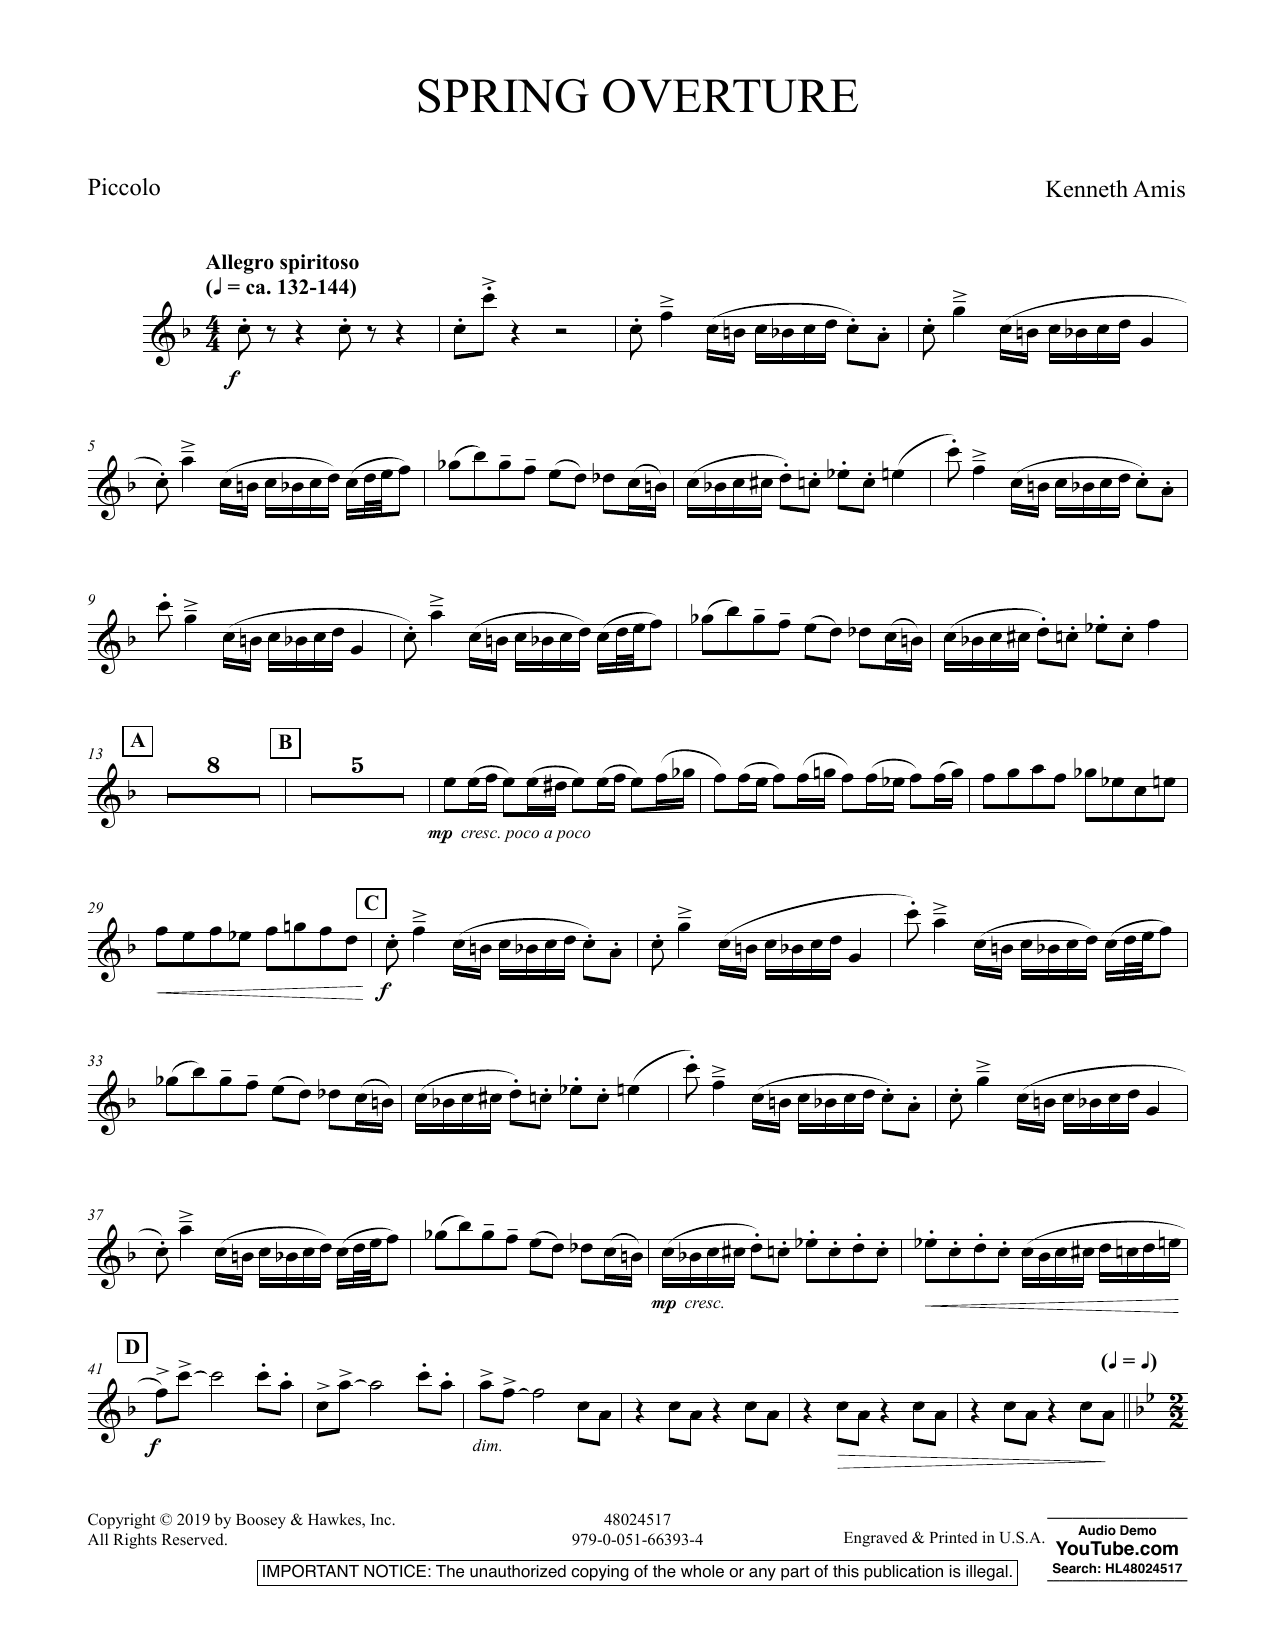 Kenneth Amis Spring Overture - Piccolo sheet music preview music notes and score for Concert Band including 3 page(s)